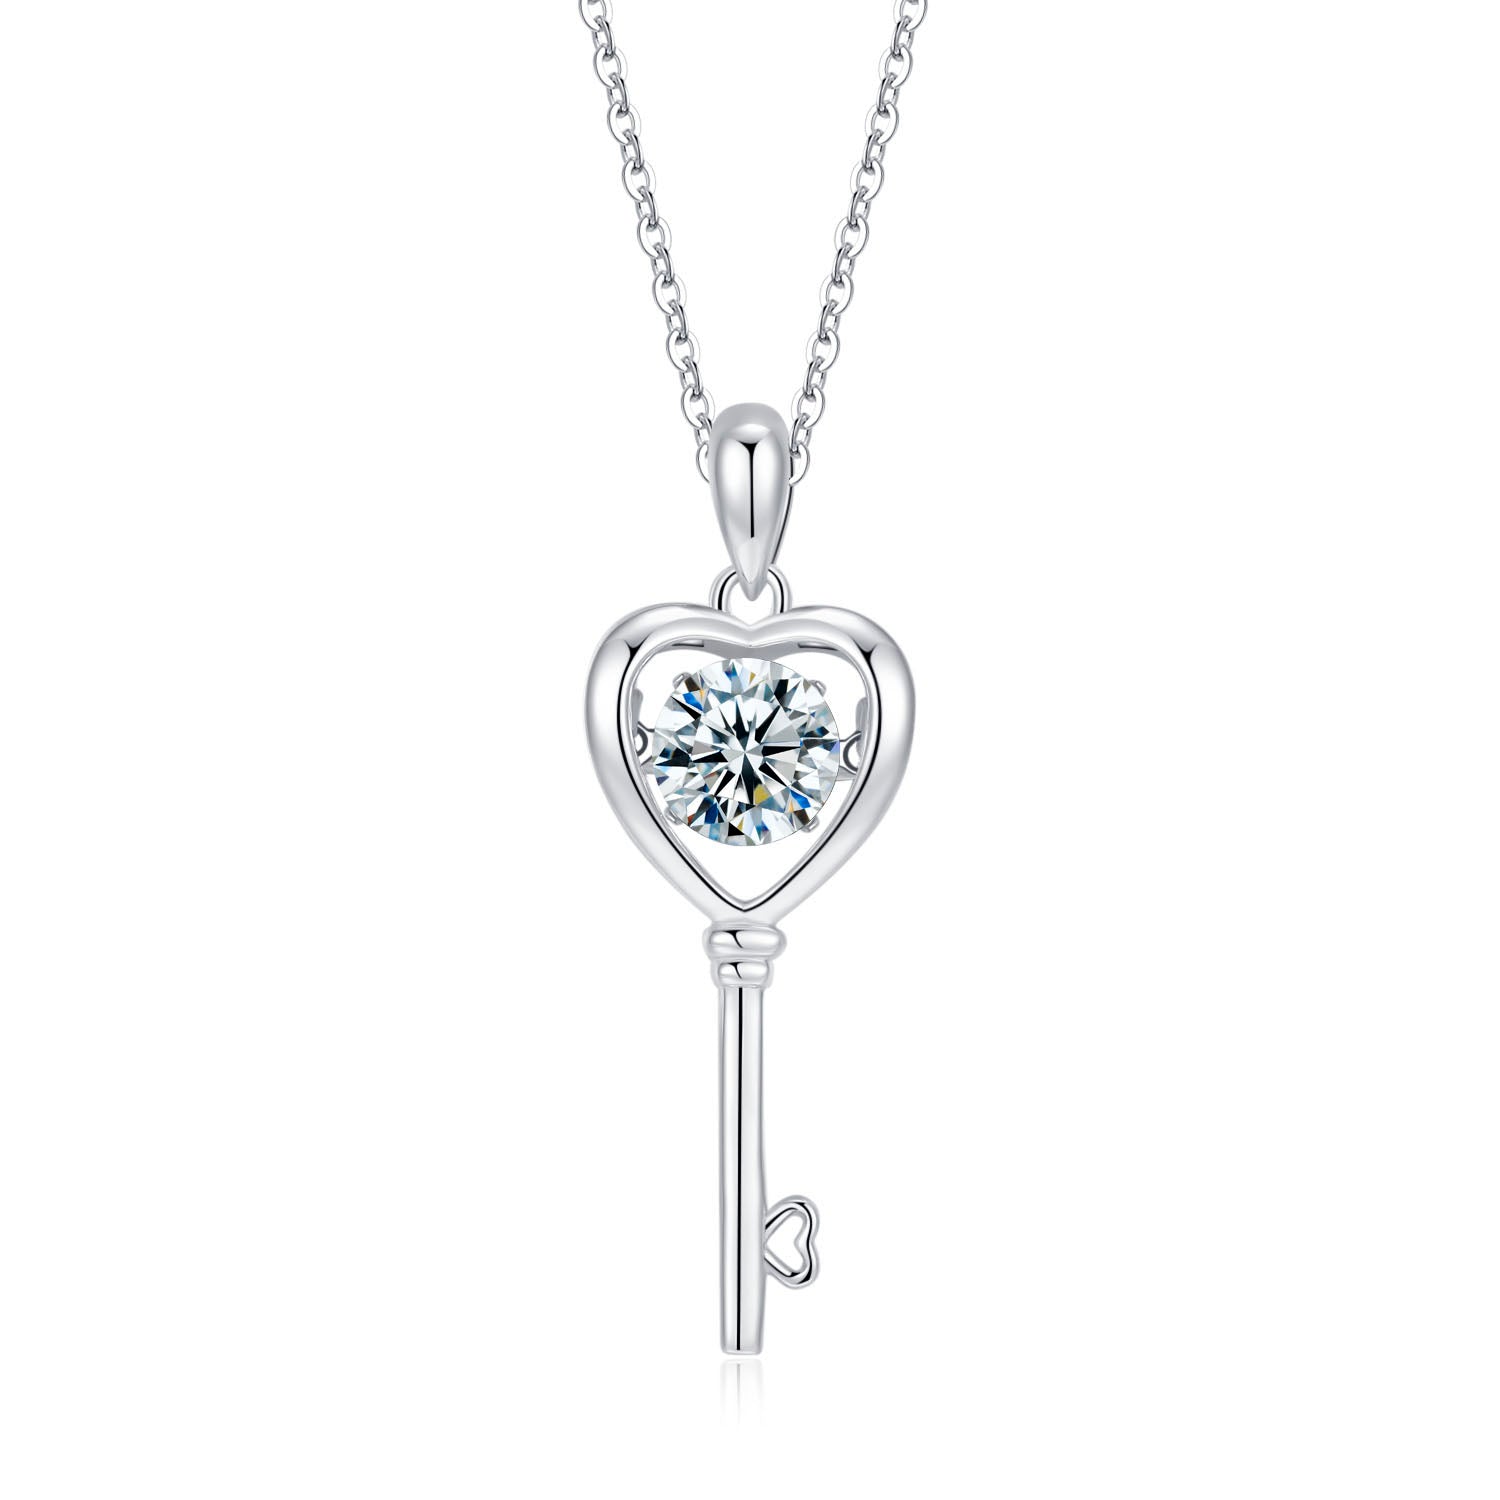 Lover's key 925 sterling silver smart necklace